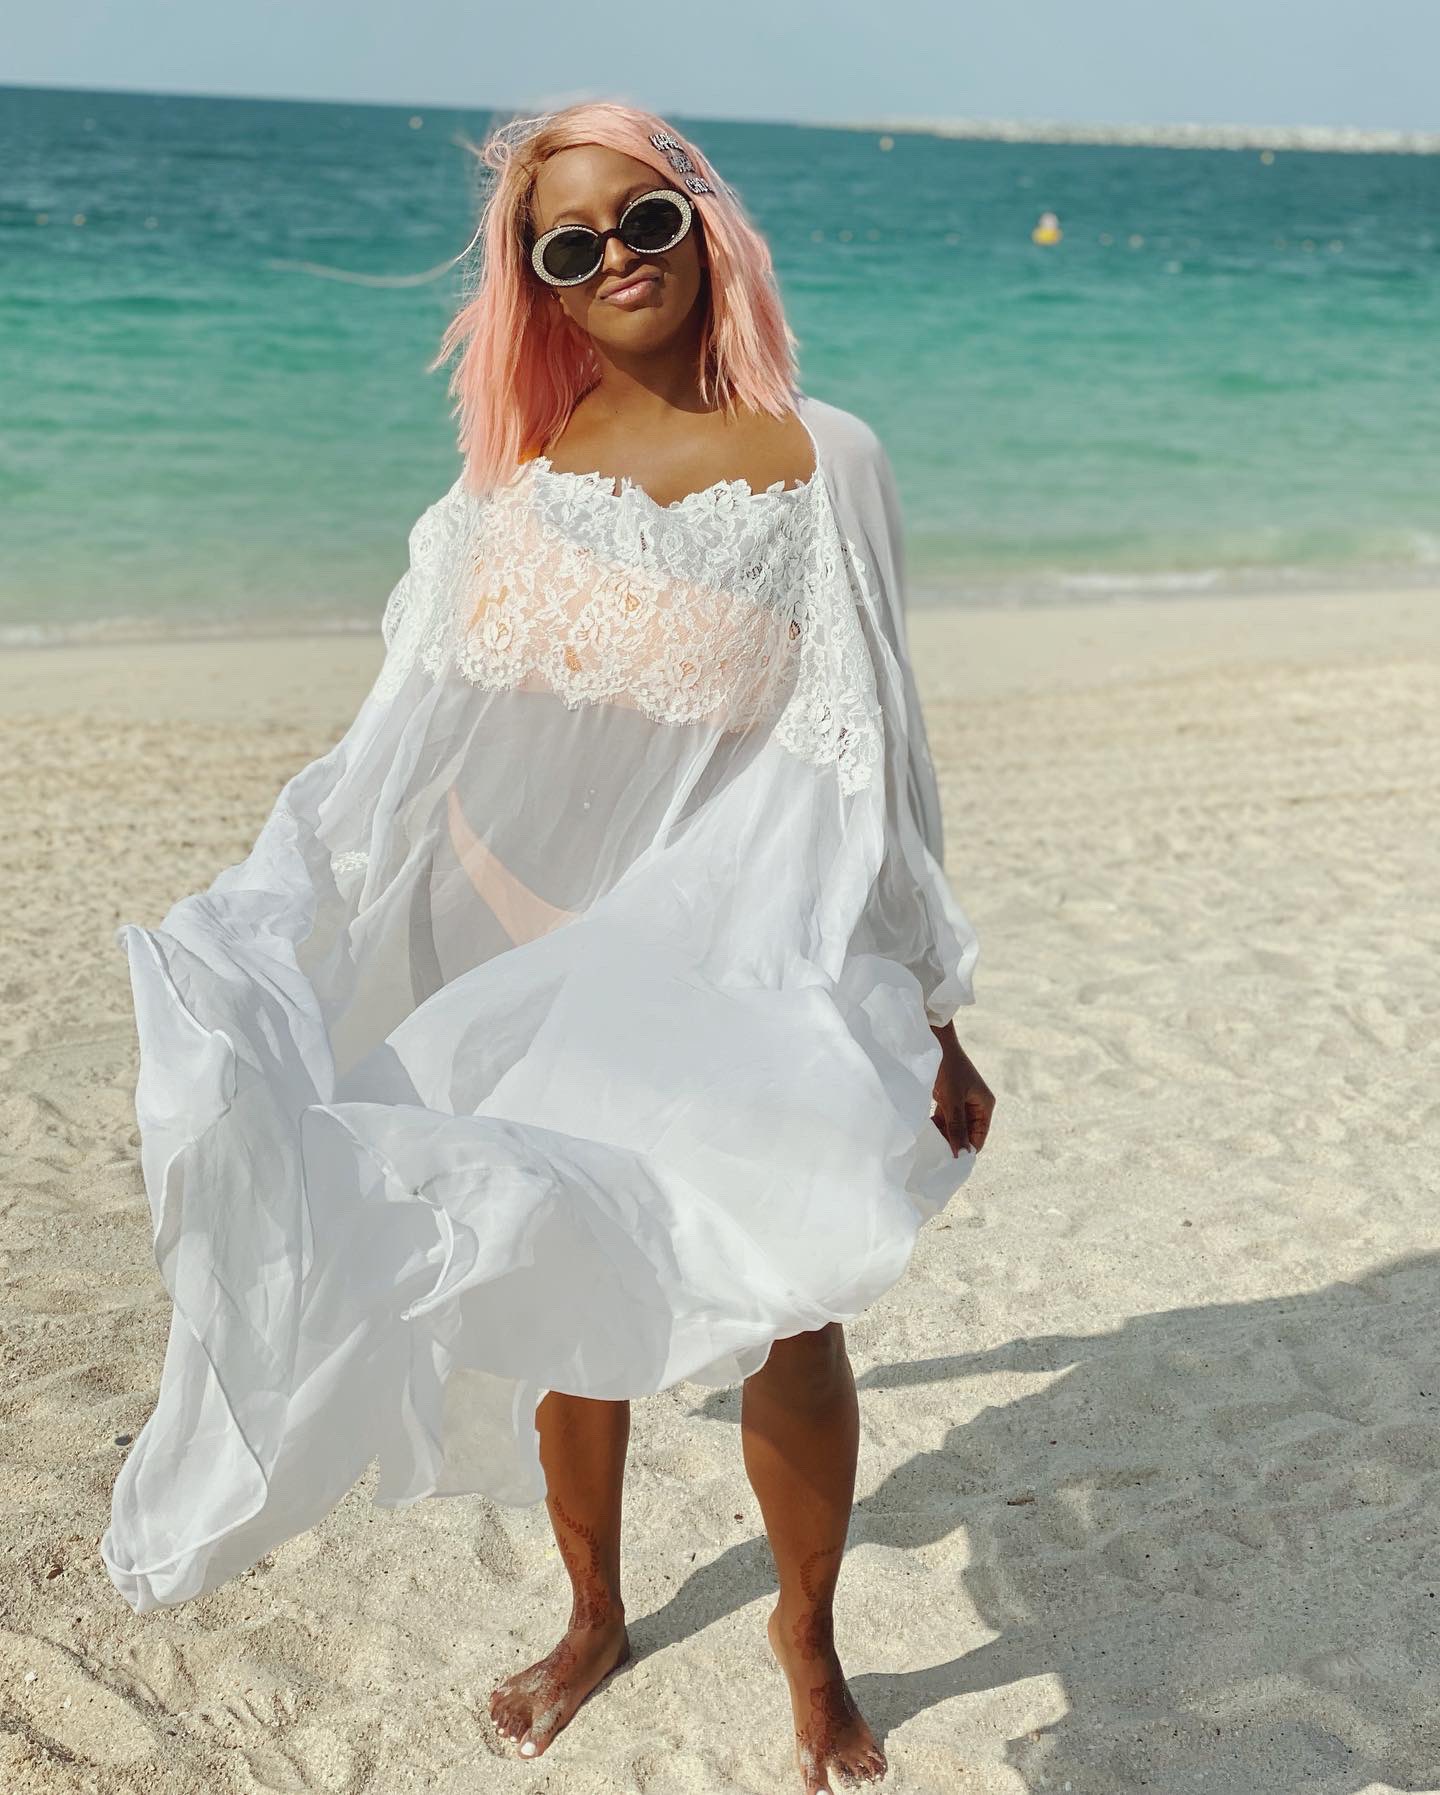 Beautiful photos of dj Cuppy by the beach